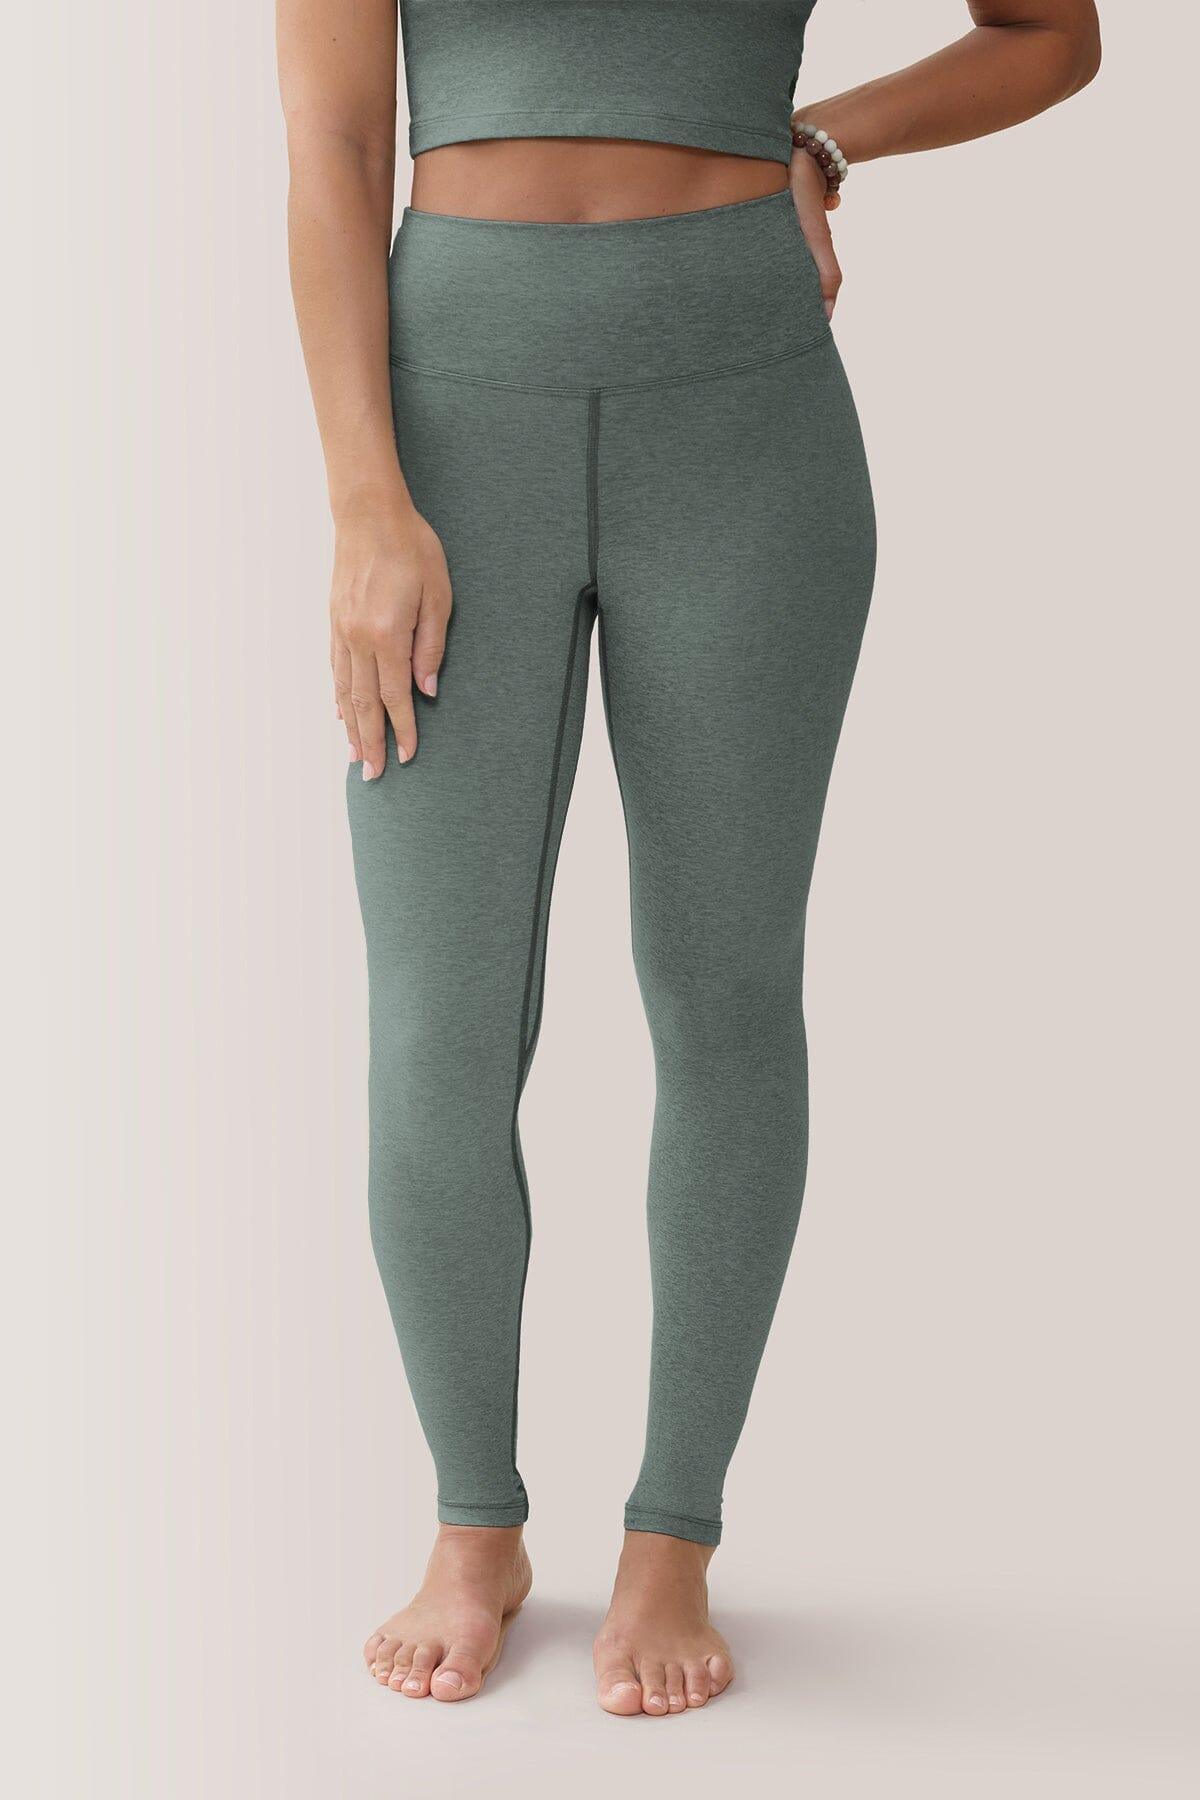 Femme qui porte les leggings taille-haute Buttery Soft BFF de Rose Boreal./ Womean wearing the Buttery Soft BFF High-Rise Legging from Rose Boreal. -Teal / Agave